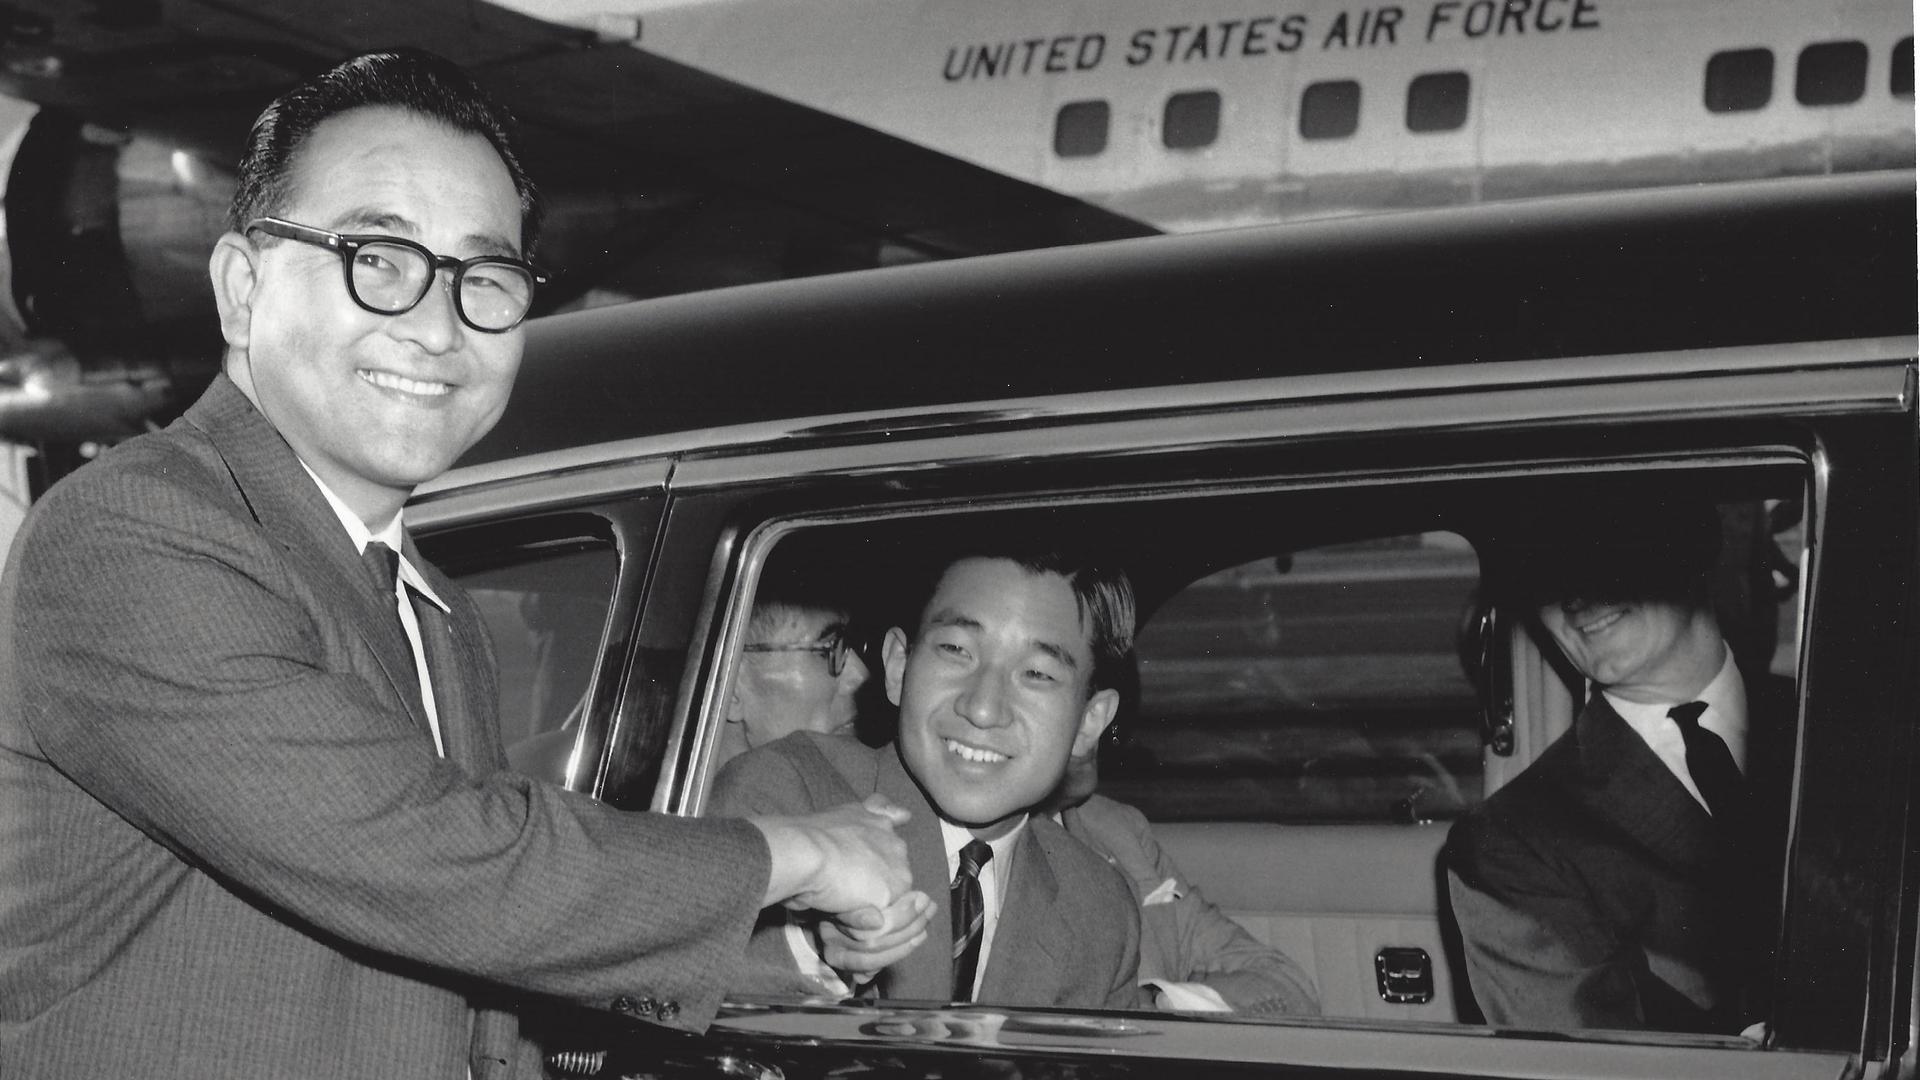 Bruce Kaji, shaking the hand of Japan's Crown Prince who had just landed in Los Angeles on a US Air Force airplane, in 1961. "In our family, we call this photo, The Prince and the Pauper.," says Bruce's son, Jon.